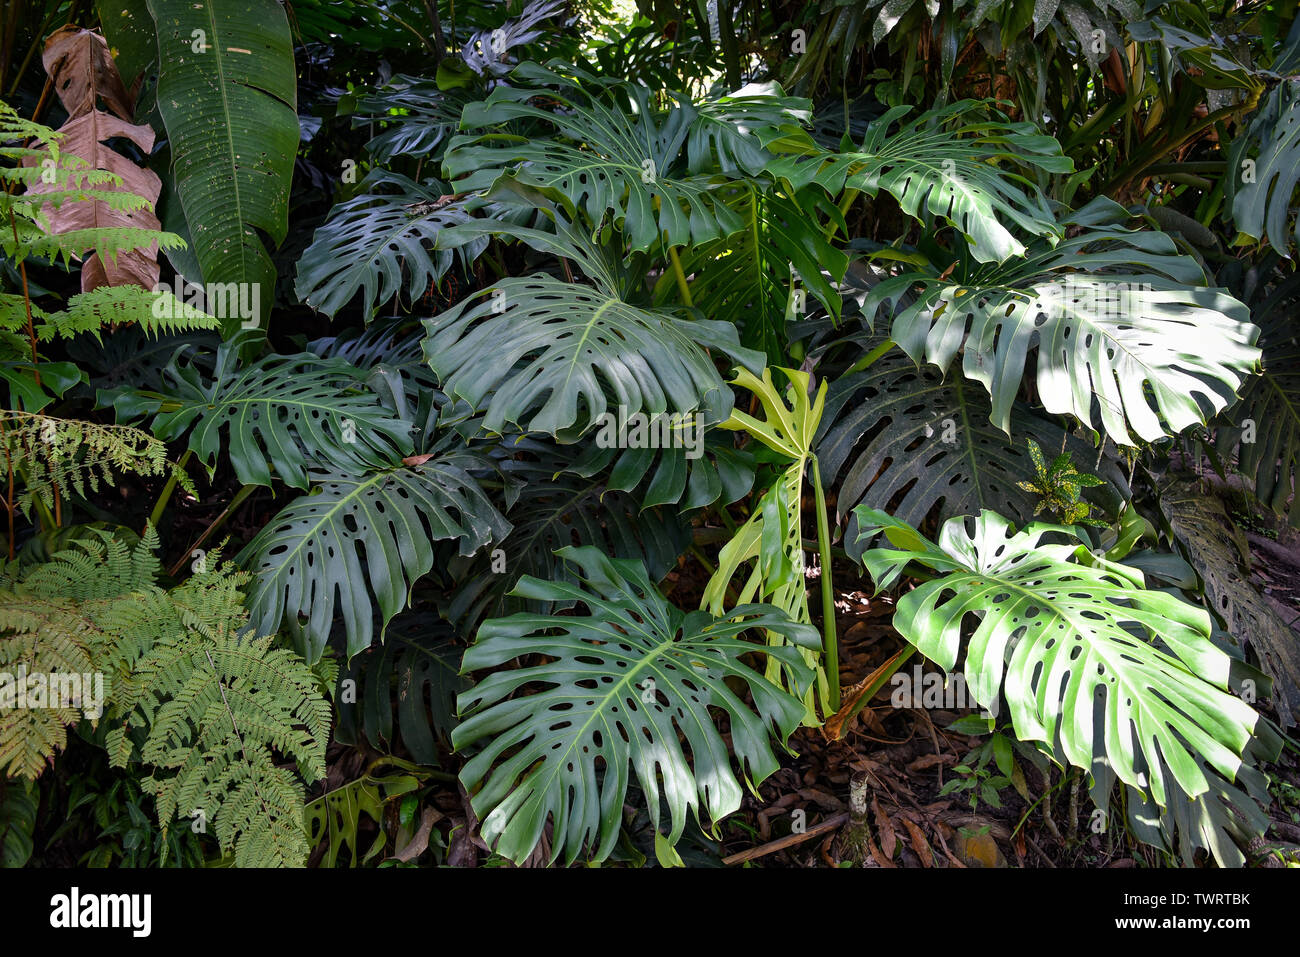 Monstera plants growing in tropical forest in the Chanchamayo region of Peru Stock Photo